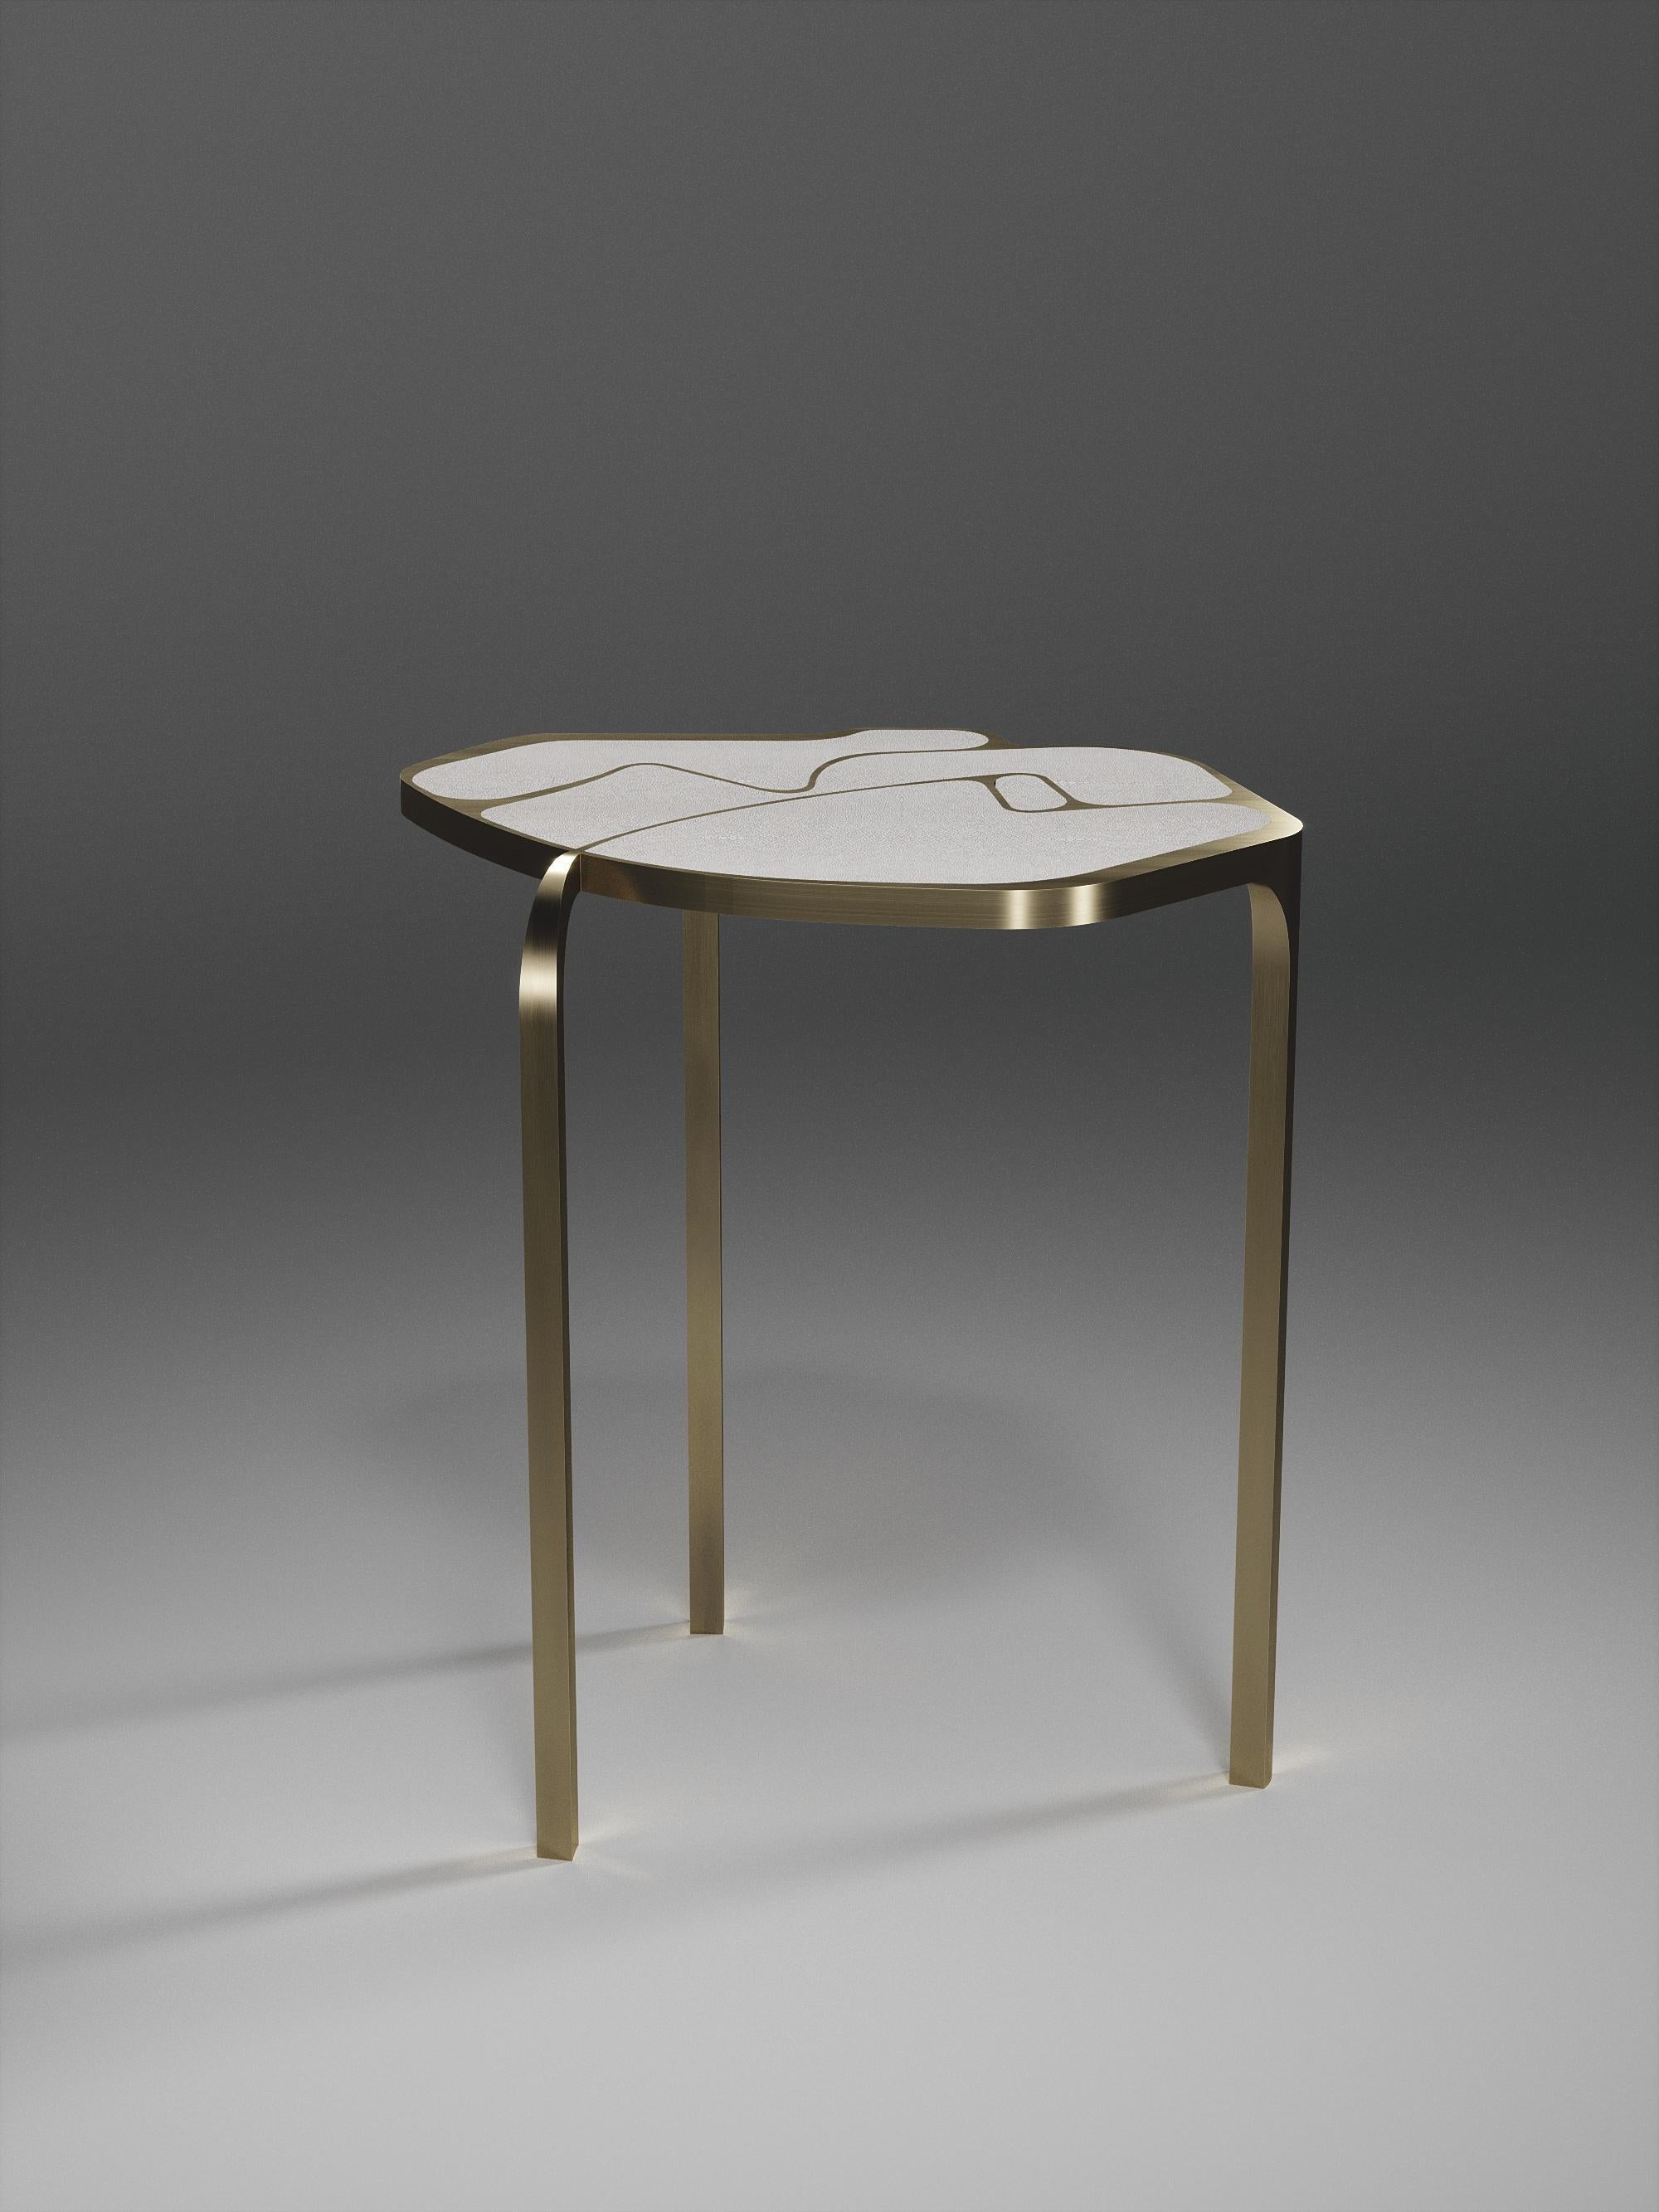 The Cocteau side table by R & Y Augousti is a truly one of a kind piece. The sculptural and ethereal piece has abstract forms, shapes and figures within it that one could interpret in different ways. The bronze-patina brass inserts in the cream